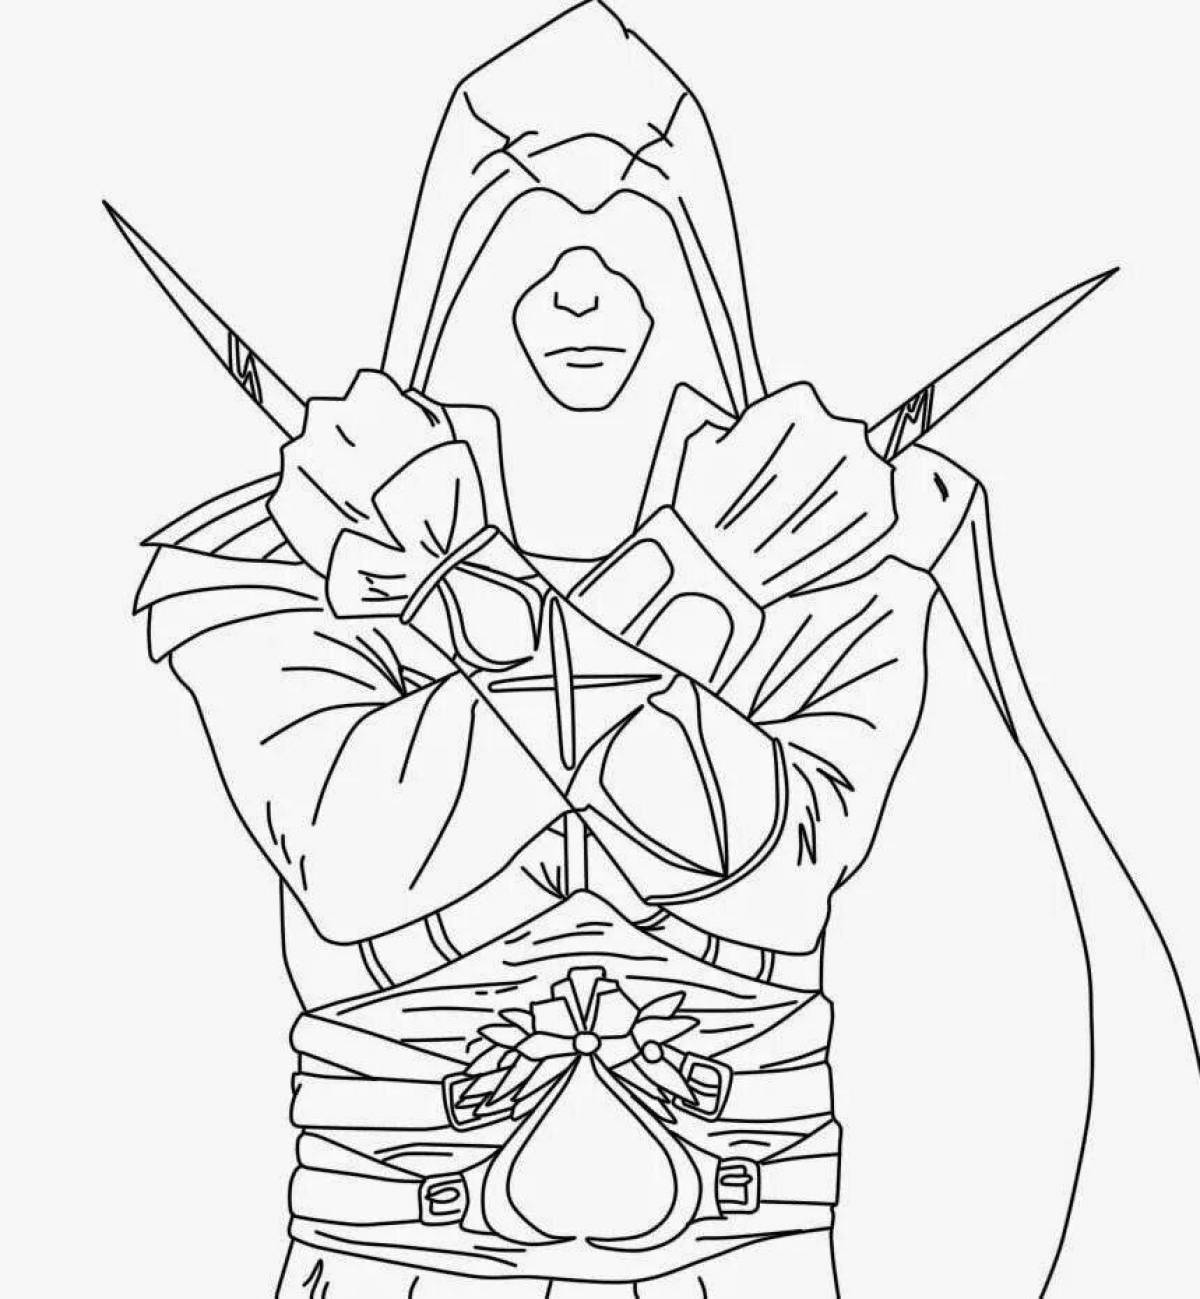 Dazzling assassin's creed coloring page